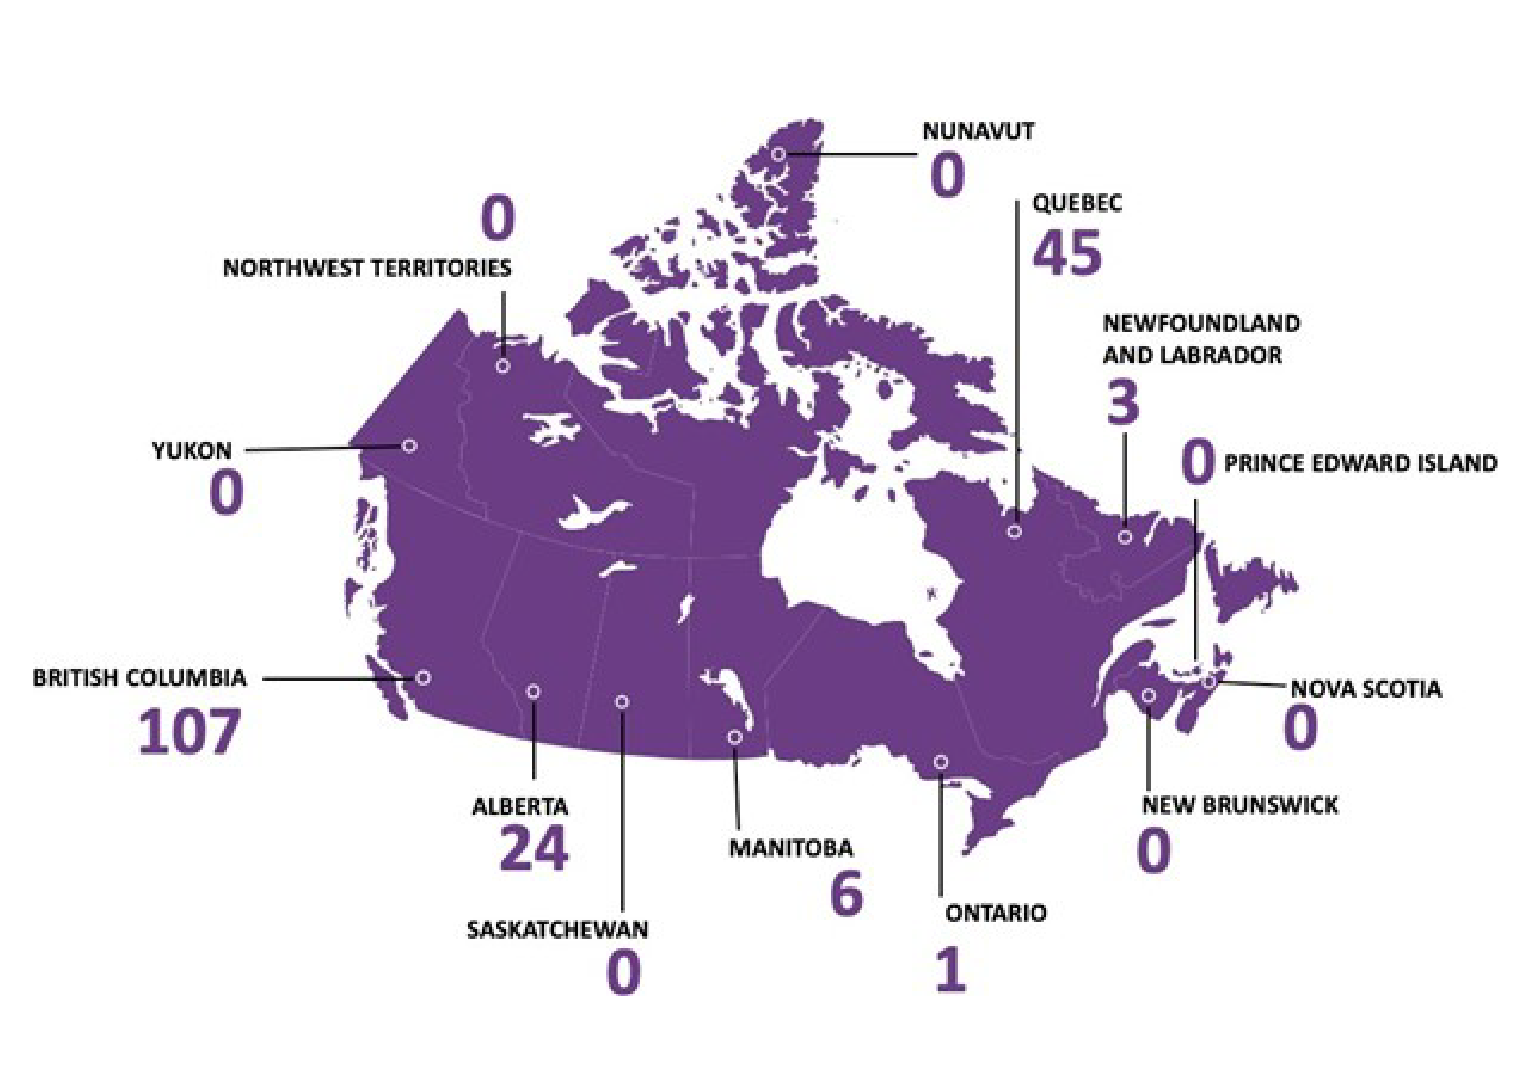 In the Nunavut, Northwest Territories, Yukon, Saskatchewan, New Brunswick, Nova Scotia, Prince-Edward-Island, there are no alpha-1 patients receiving treatment through public payer. Therefore, British Columbia has 107 patients, Alberta has 24 patients, Manitoba has 6 patients, Ontario has only one patient, Newfoundland and Labrador has 3 patients, and Quebec has 45 patients.